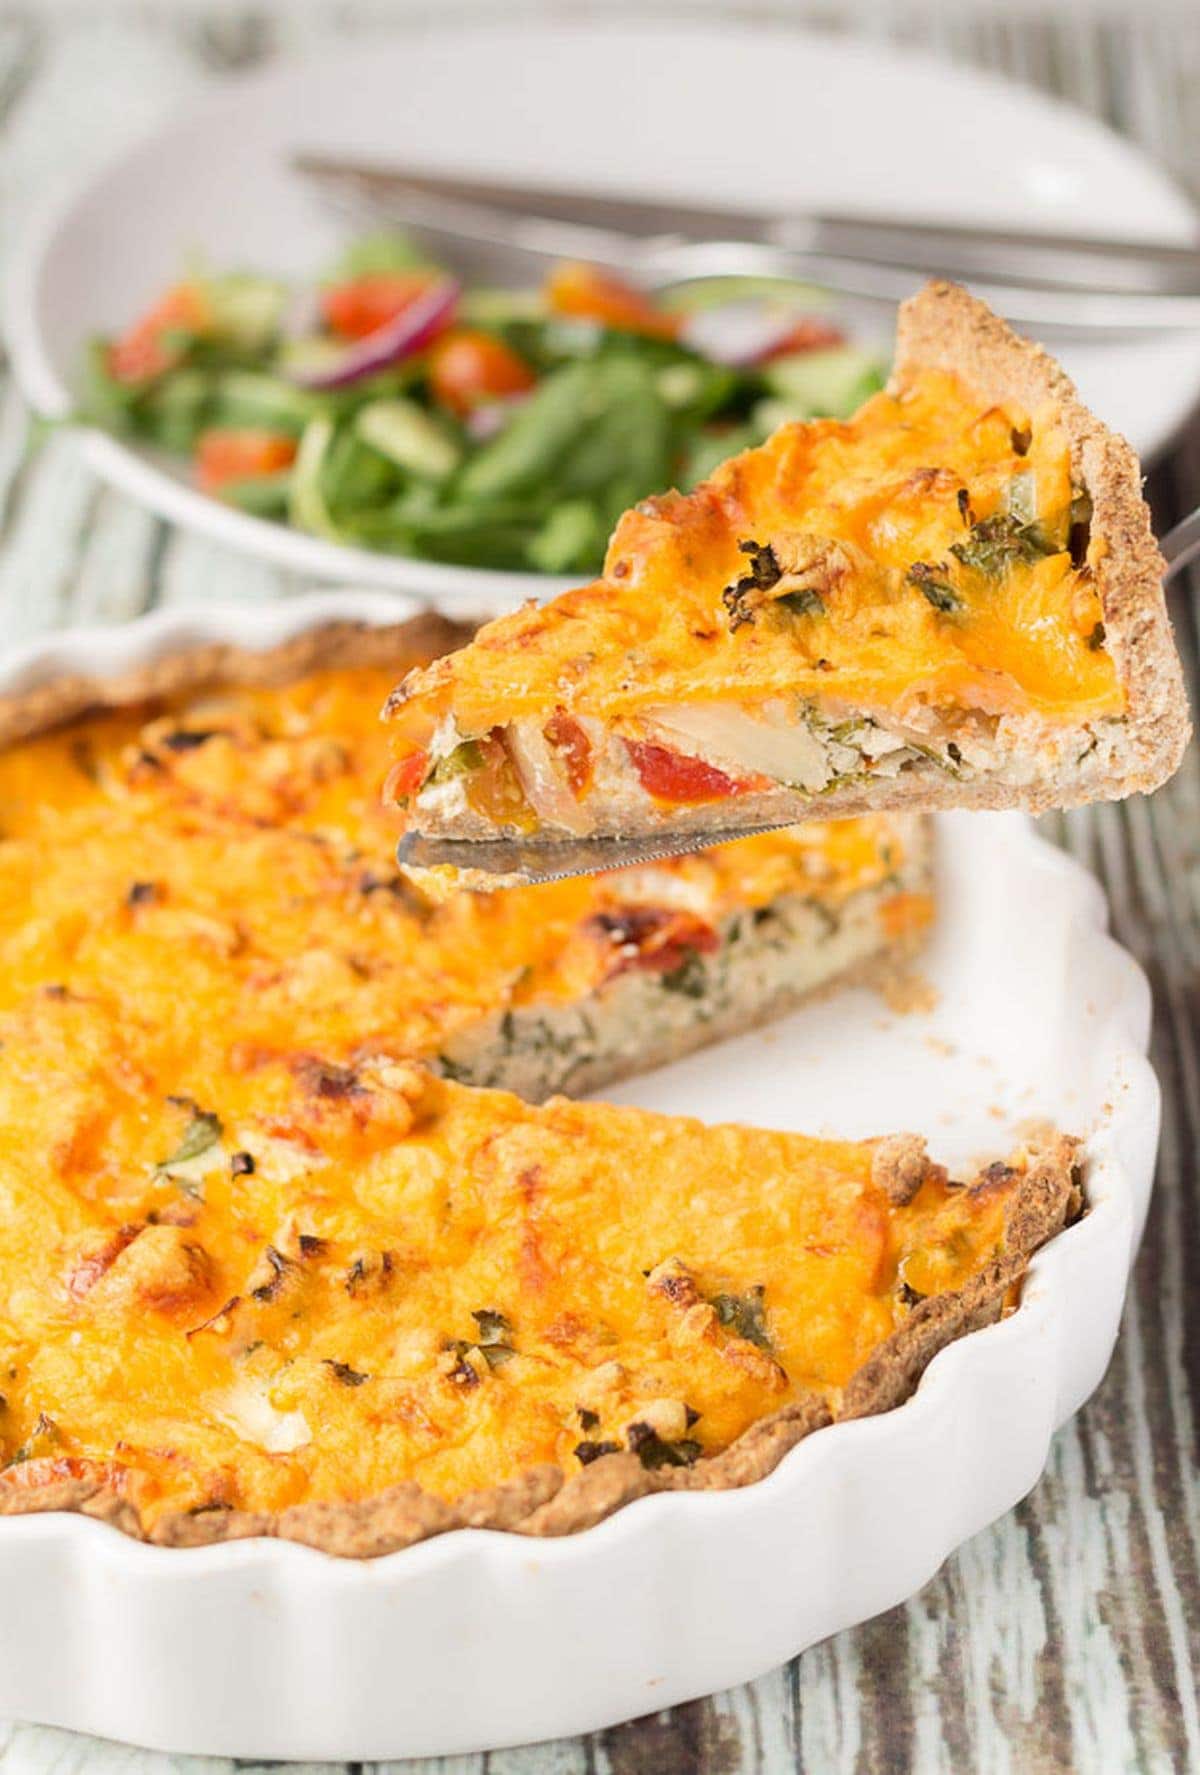 A slice of cheesy tomato and kale quiche being lifed from the quiche dish. A plate with salad on in the background.